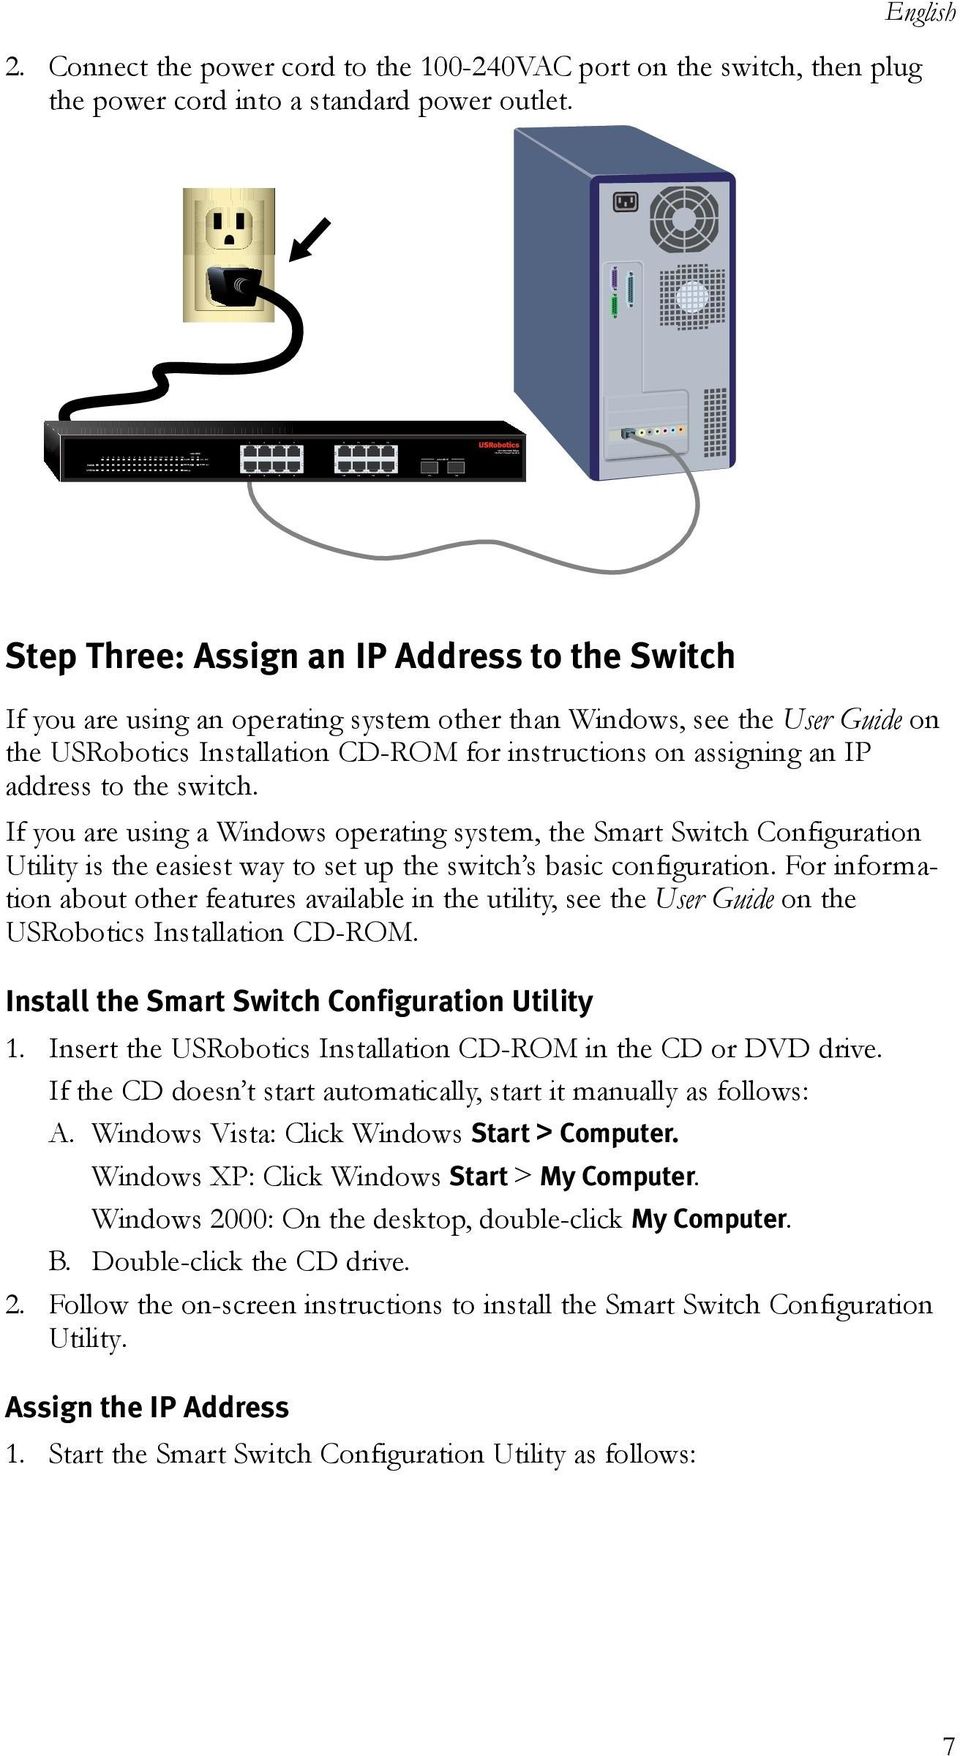 English Step Three: Assign an IP Address to the Switch If you are using an operating system other than Windows, see the User Guide on the USRobotics Installation CD-ROM for instructions on assigning